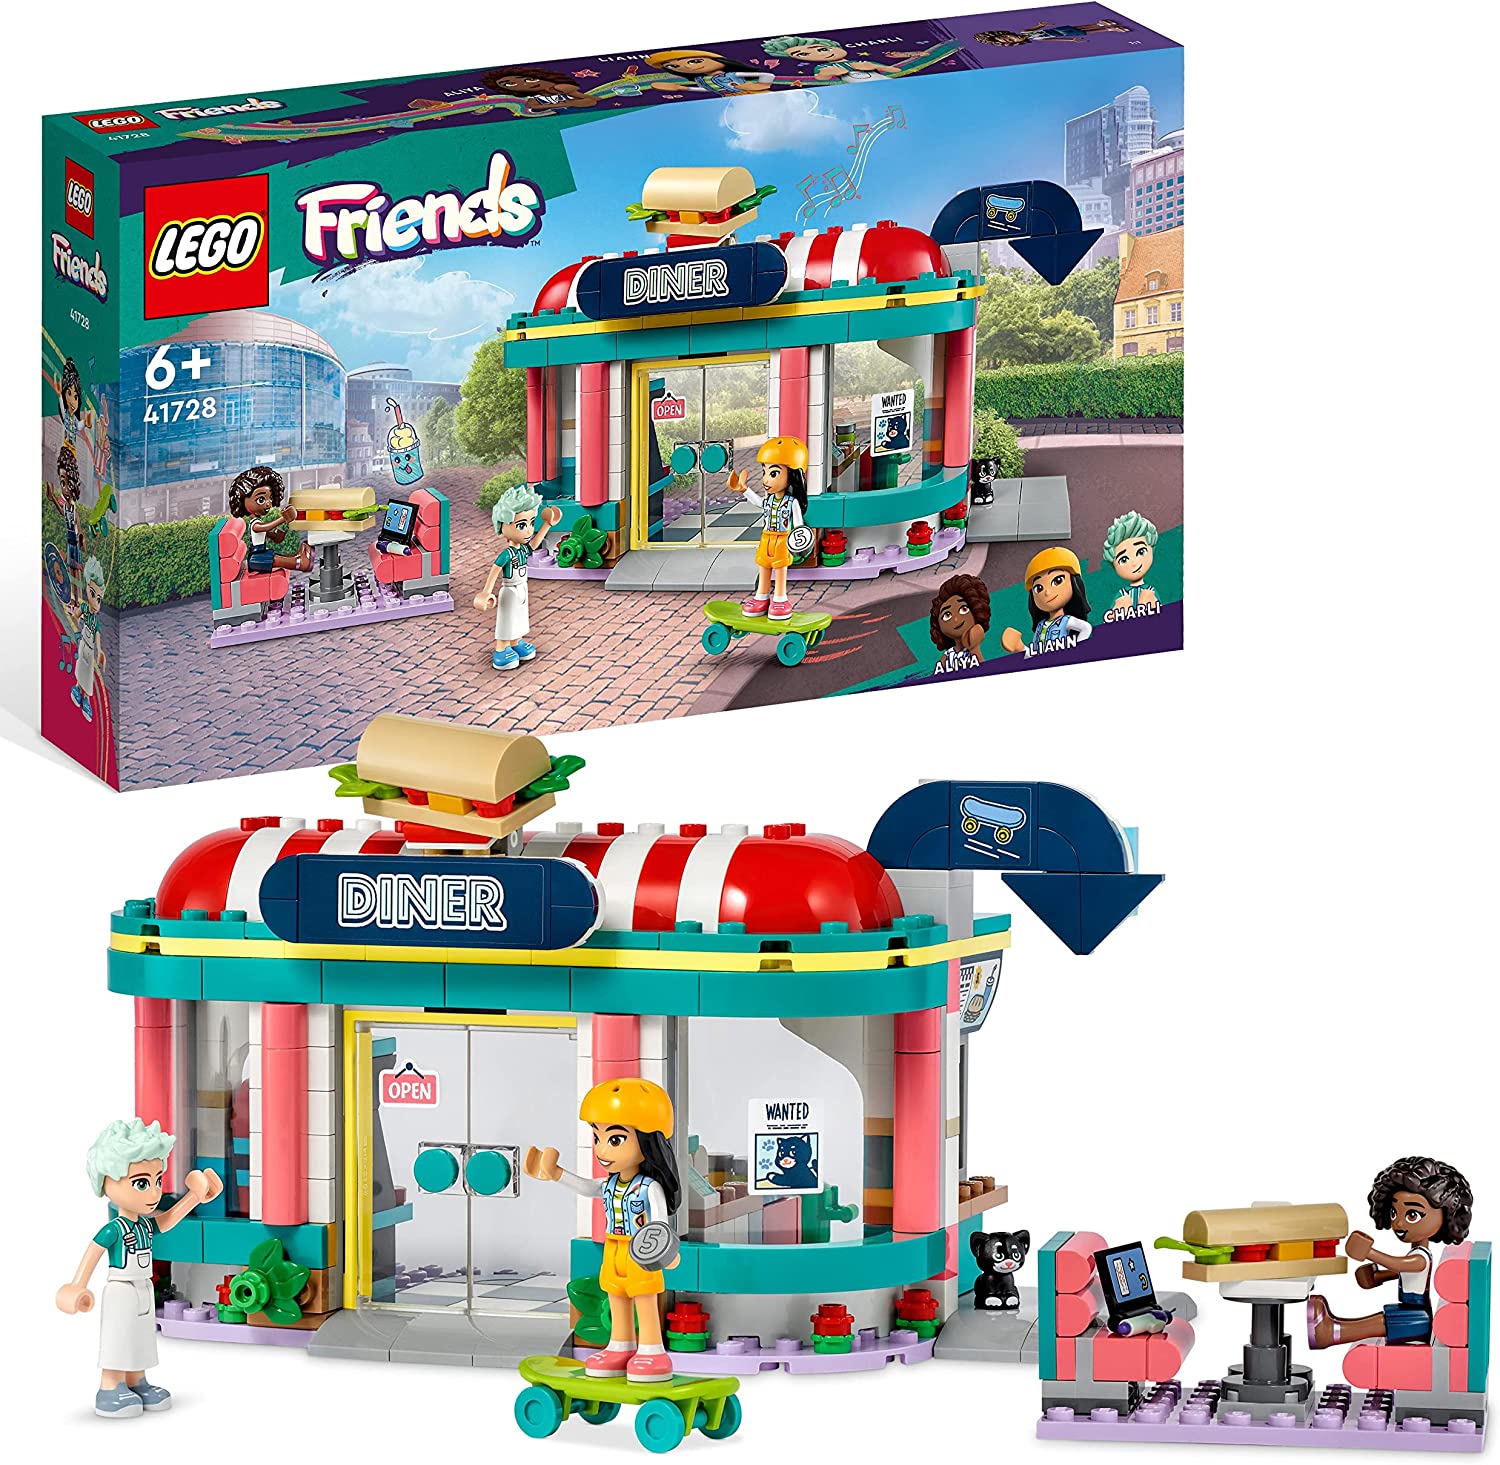 LEGO 41728 Friends Restaurant in the City with Toy Mini Dolls Liann, Aliya and Charli from 2023, Restaurant Playset for Children from 6 Years